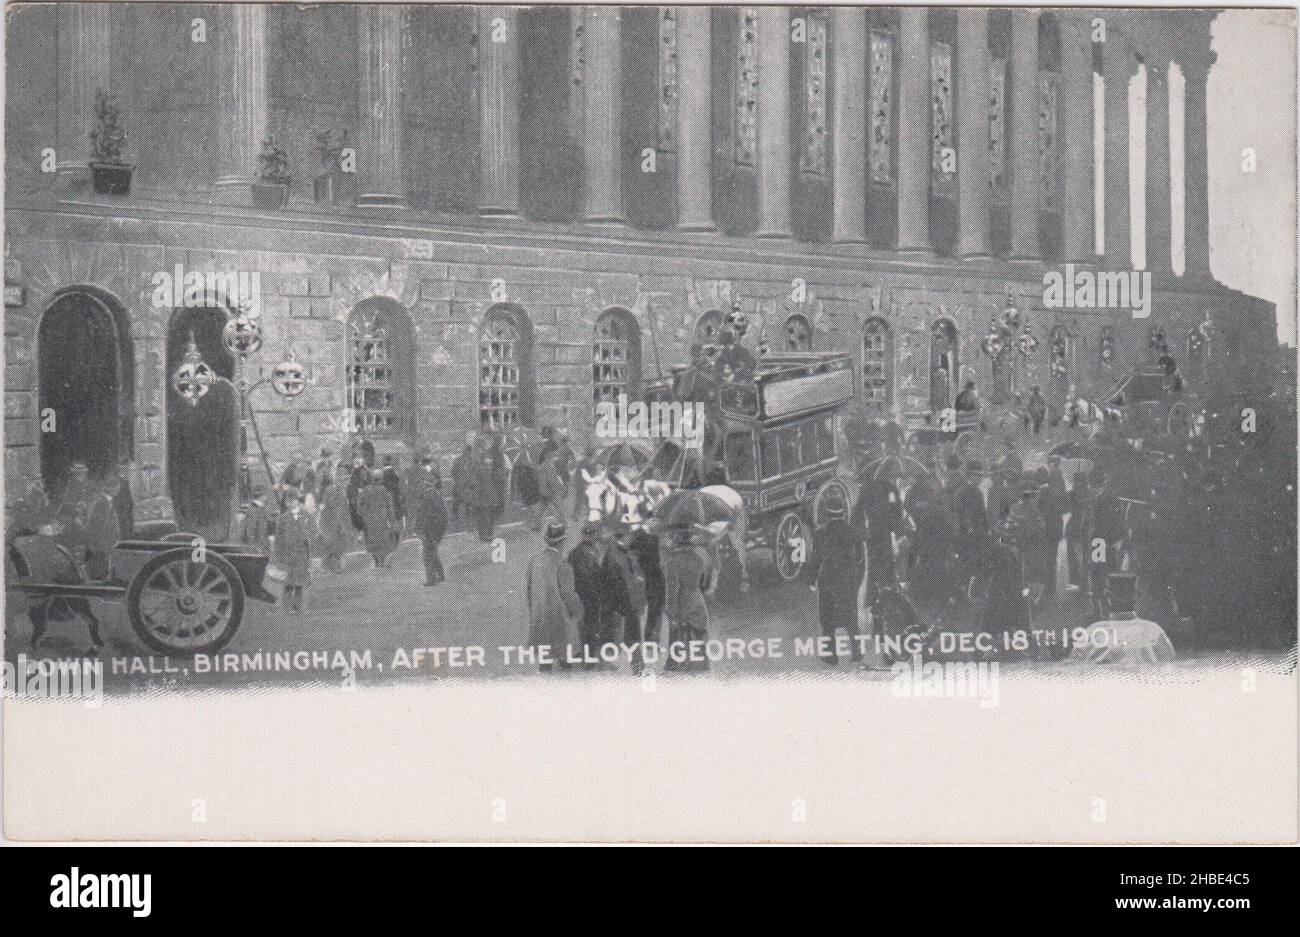 'Town Hall, Birmingham, after the Lloyd George meeting, Dec. 18th 1901': postcard showing the smashed windows of Birmingham Town Hall after a mob attacked an anti-war meeting held there during the Boer War. One man was killed during the Victoria Square riot and David Lloyd George, the key speaker, had to be smuggled out wearing a policeman's uniform to reduce the danger to his life Stock Photo